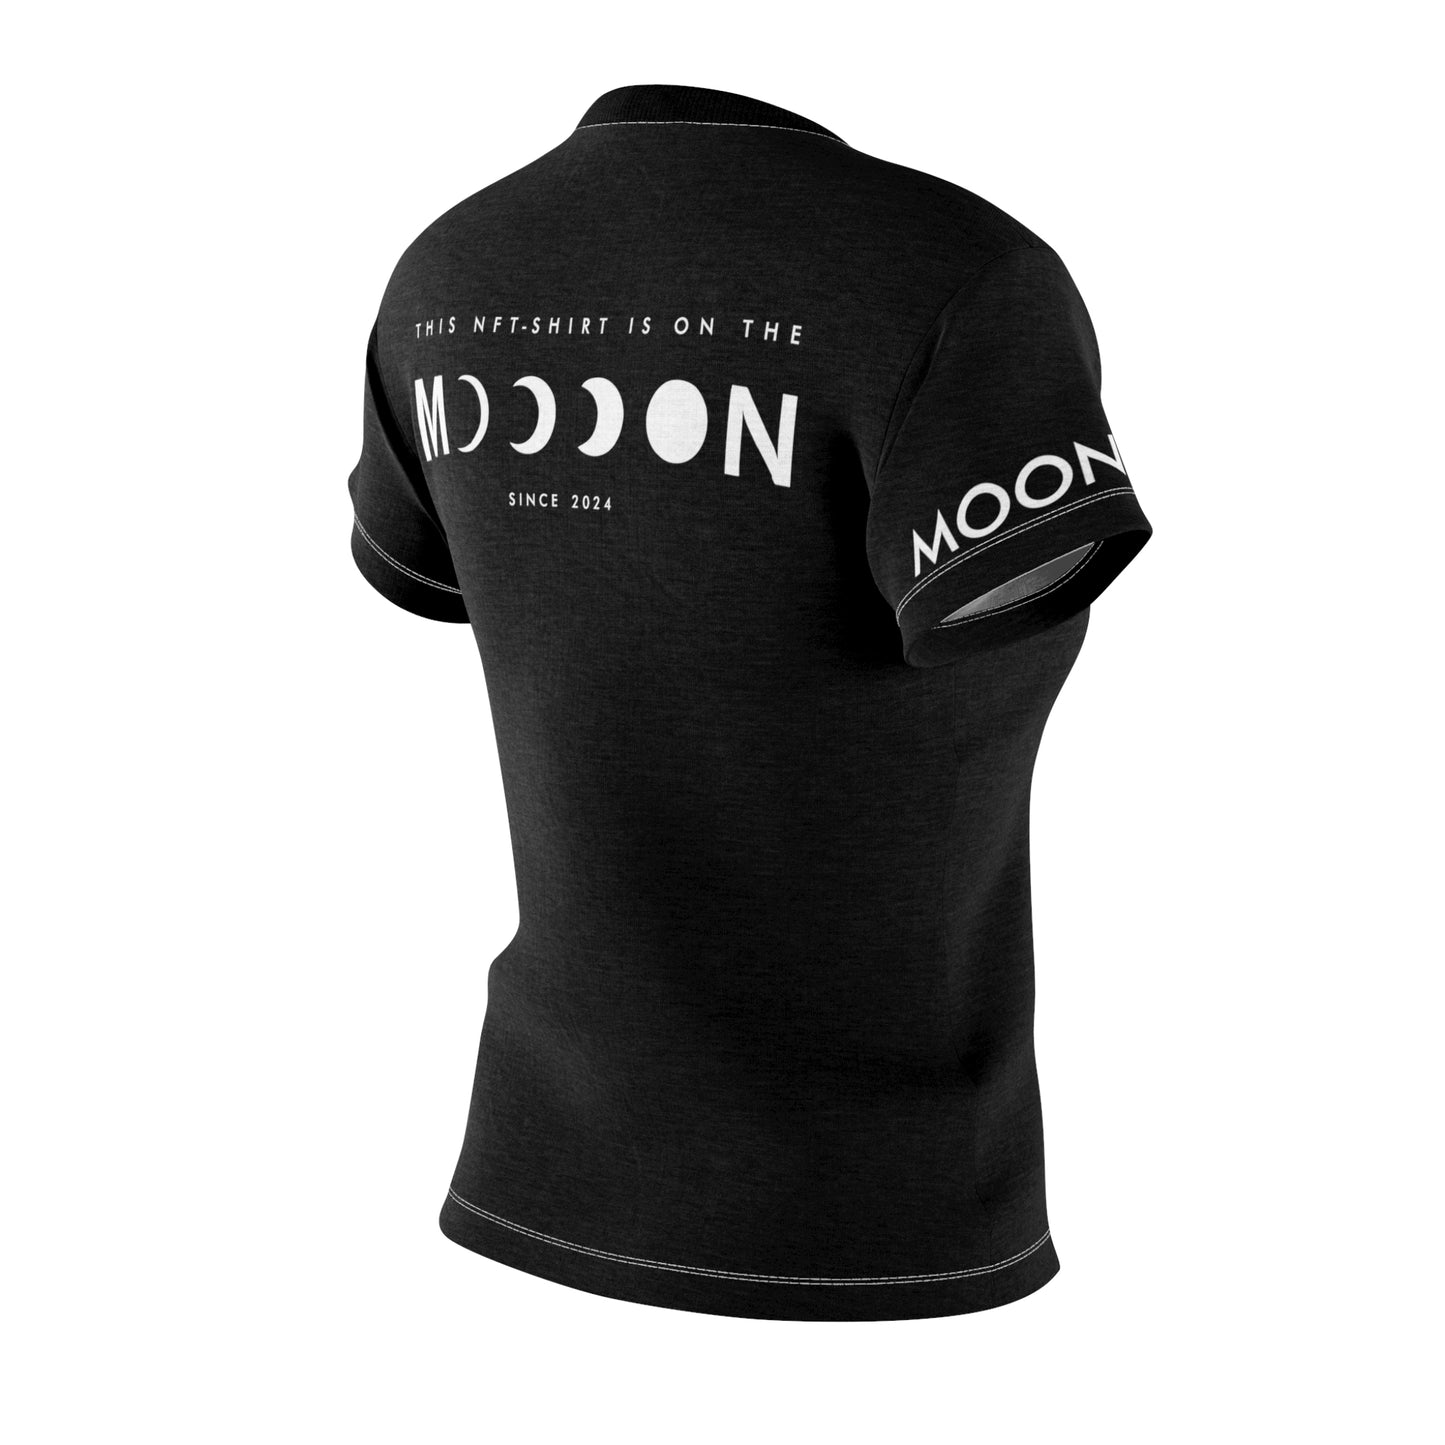 This NFT-Shirt is on the Moon BLACK Short Sleeve Sublimation Dye